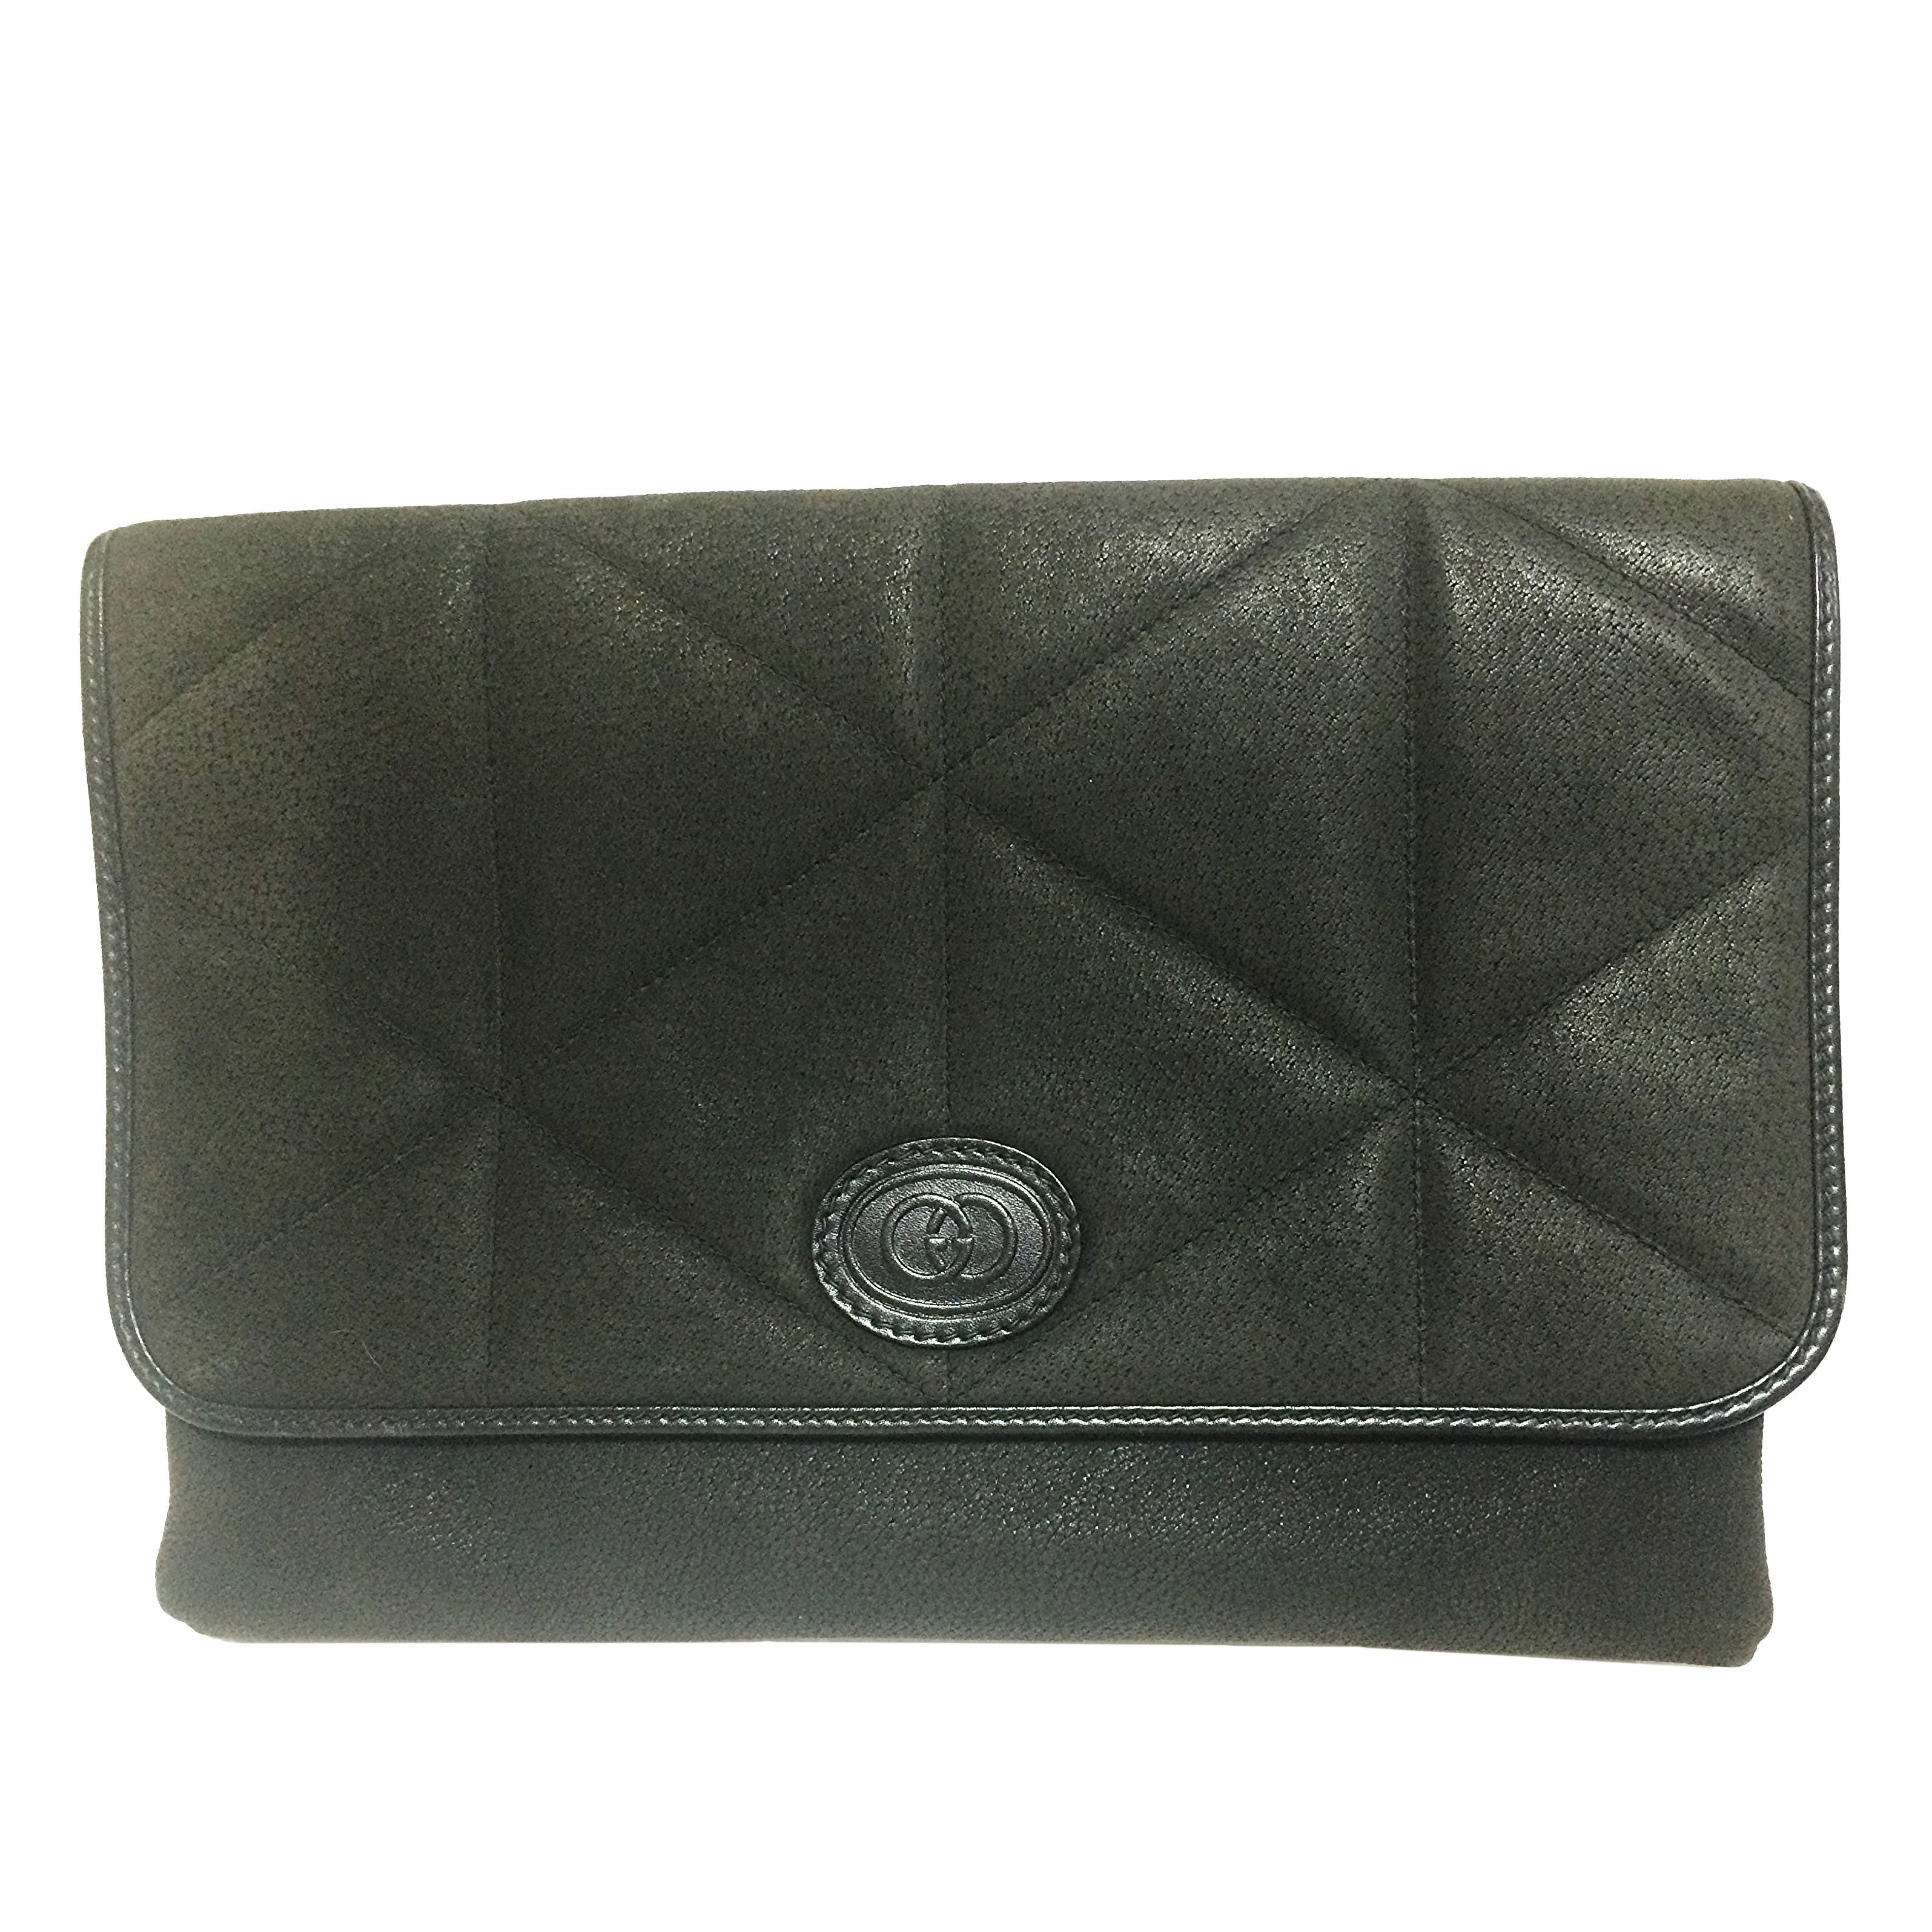 Vintage Gucci gray suede leather document clutch purse in geometric stitch. For Sale